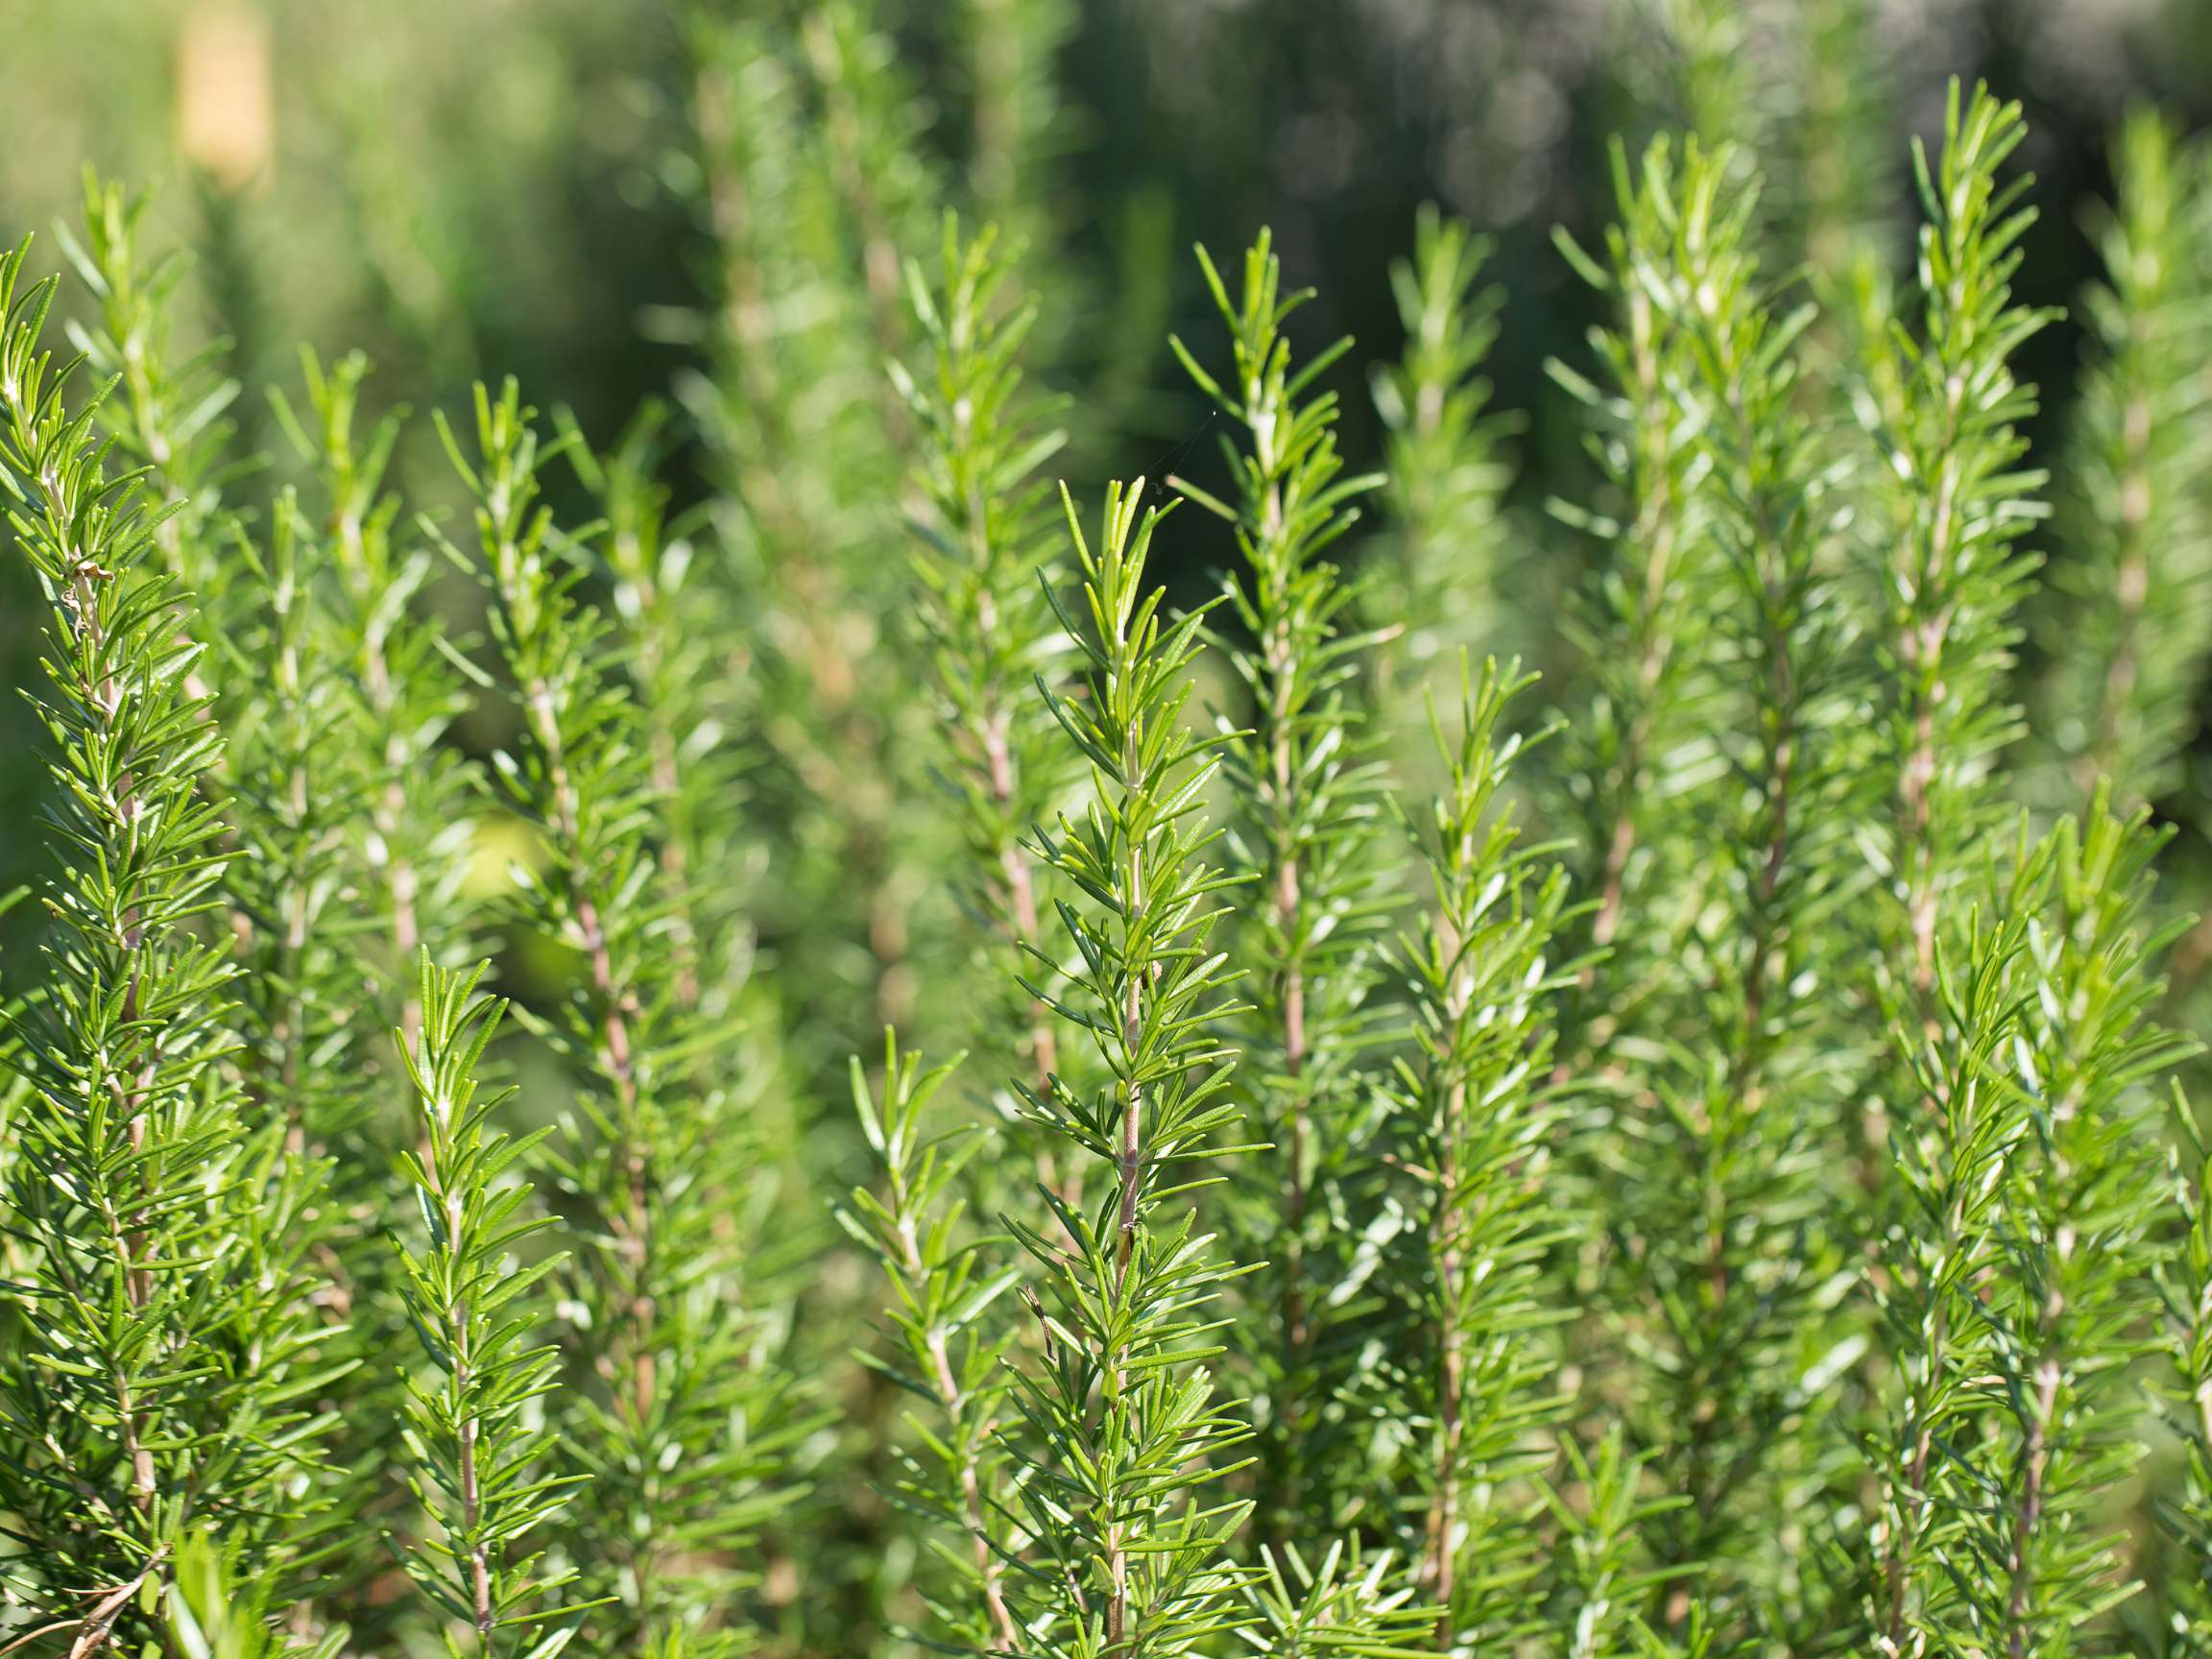 Rosemary Leaf Extract